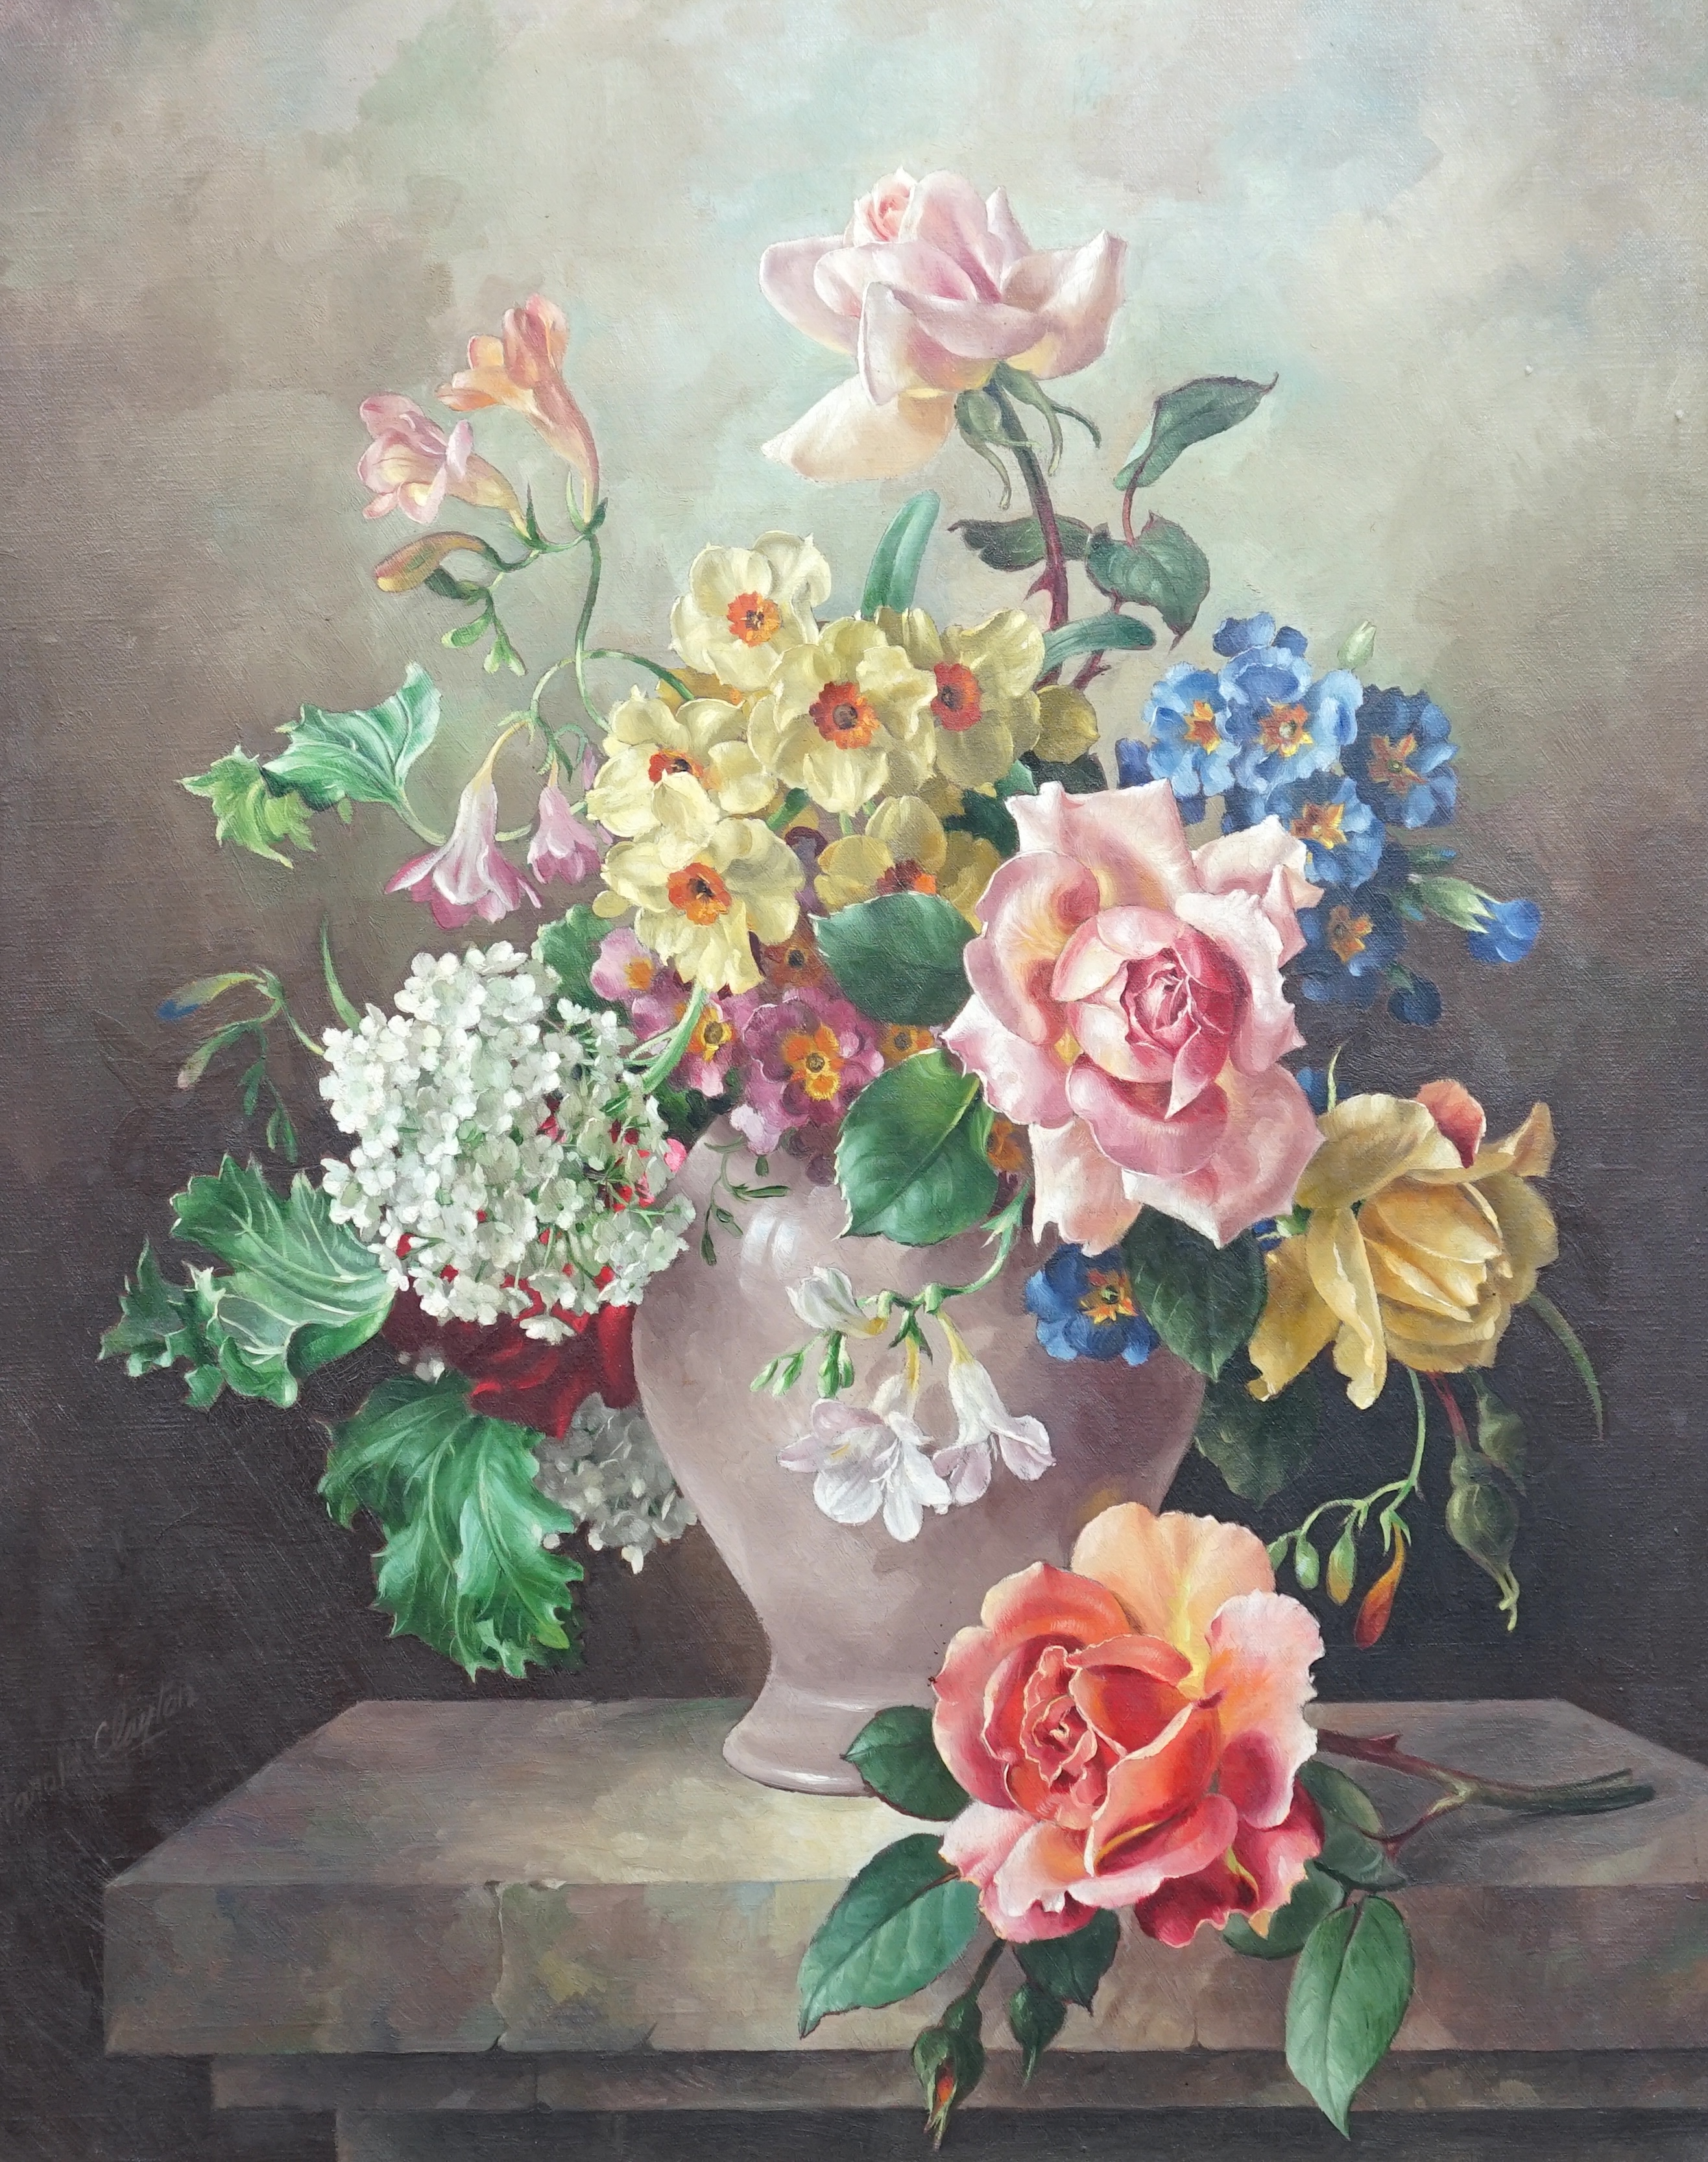 Harold Clayton (British, 1896-1979), 'Flowers in a vase', oil on canvas, 50 x 40cm